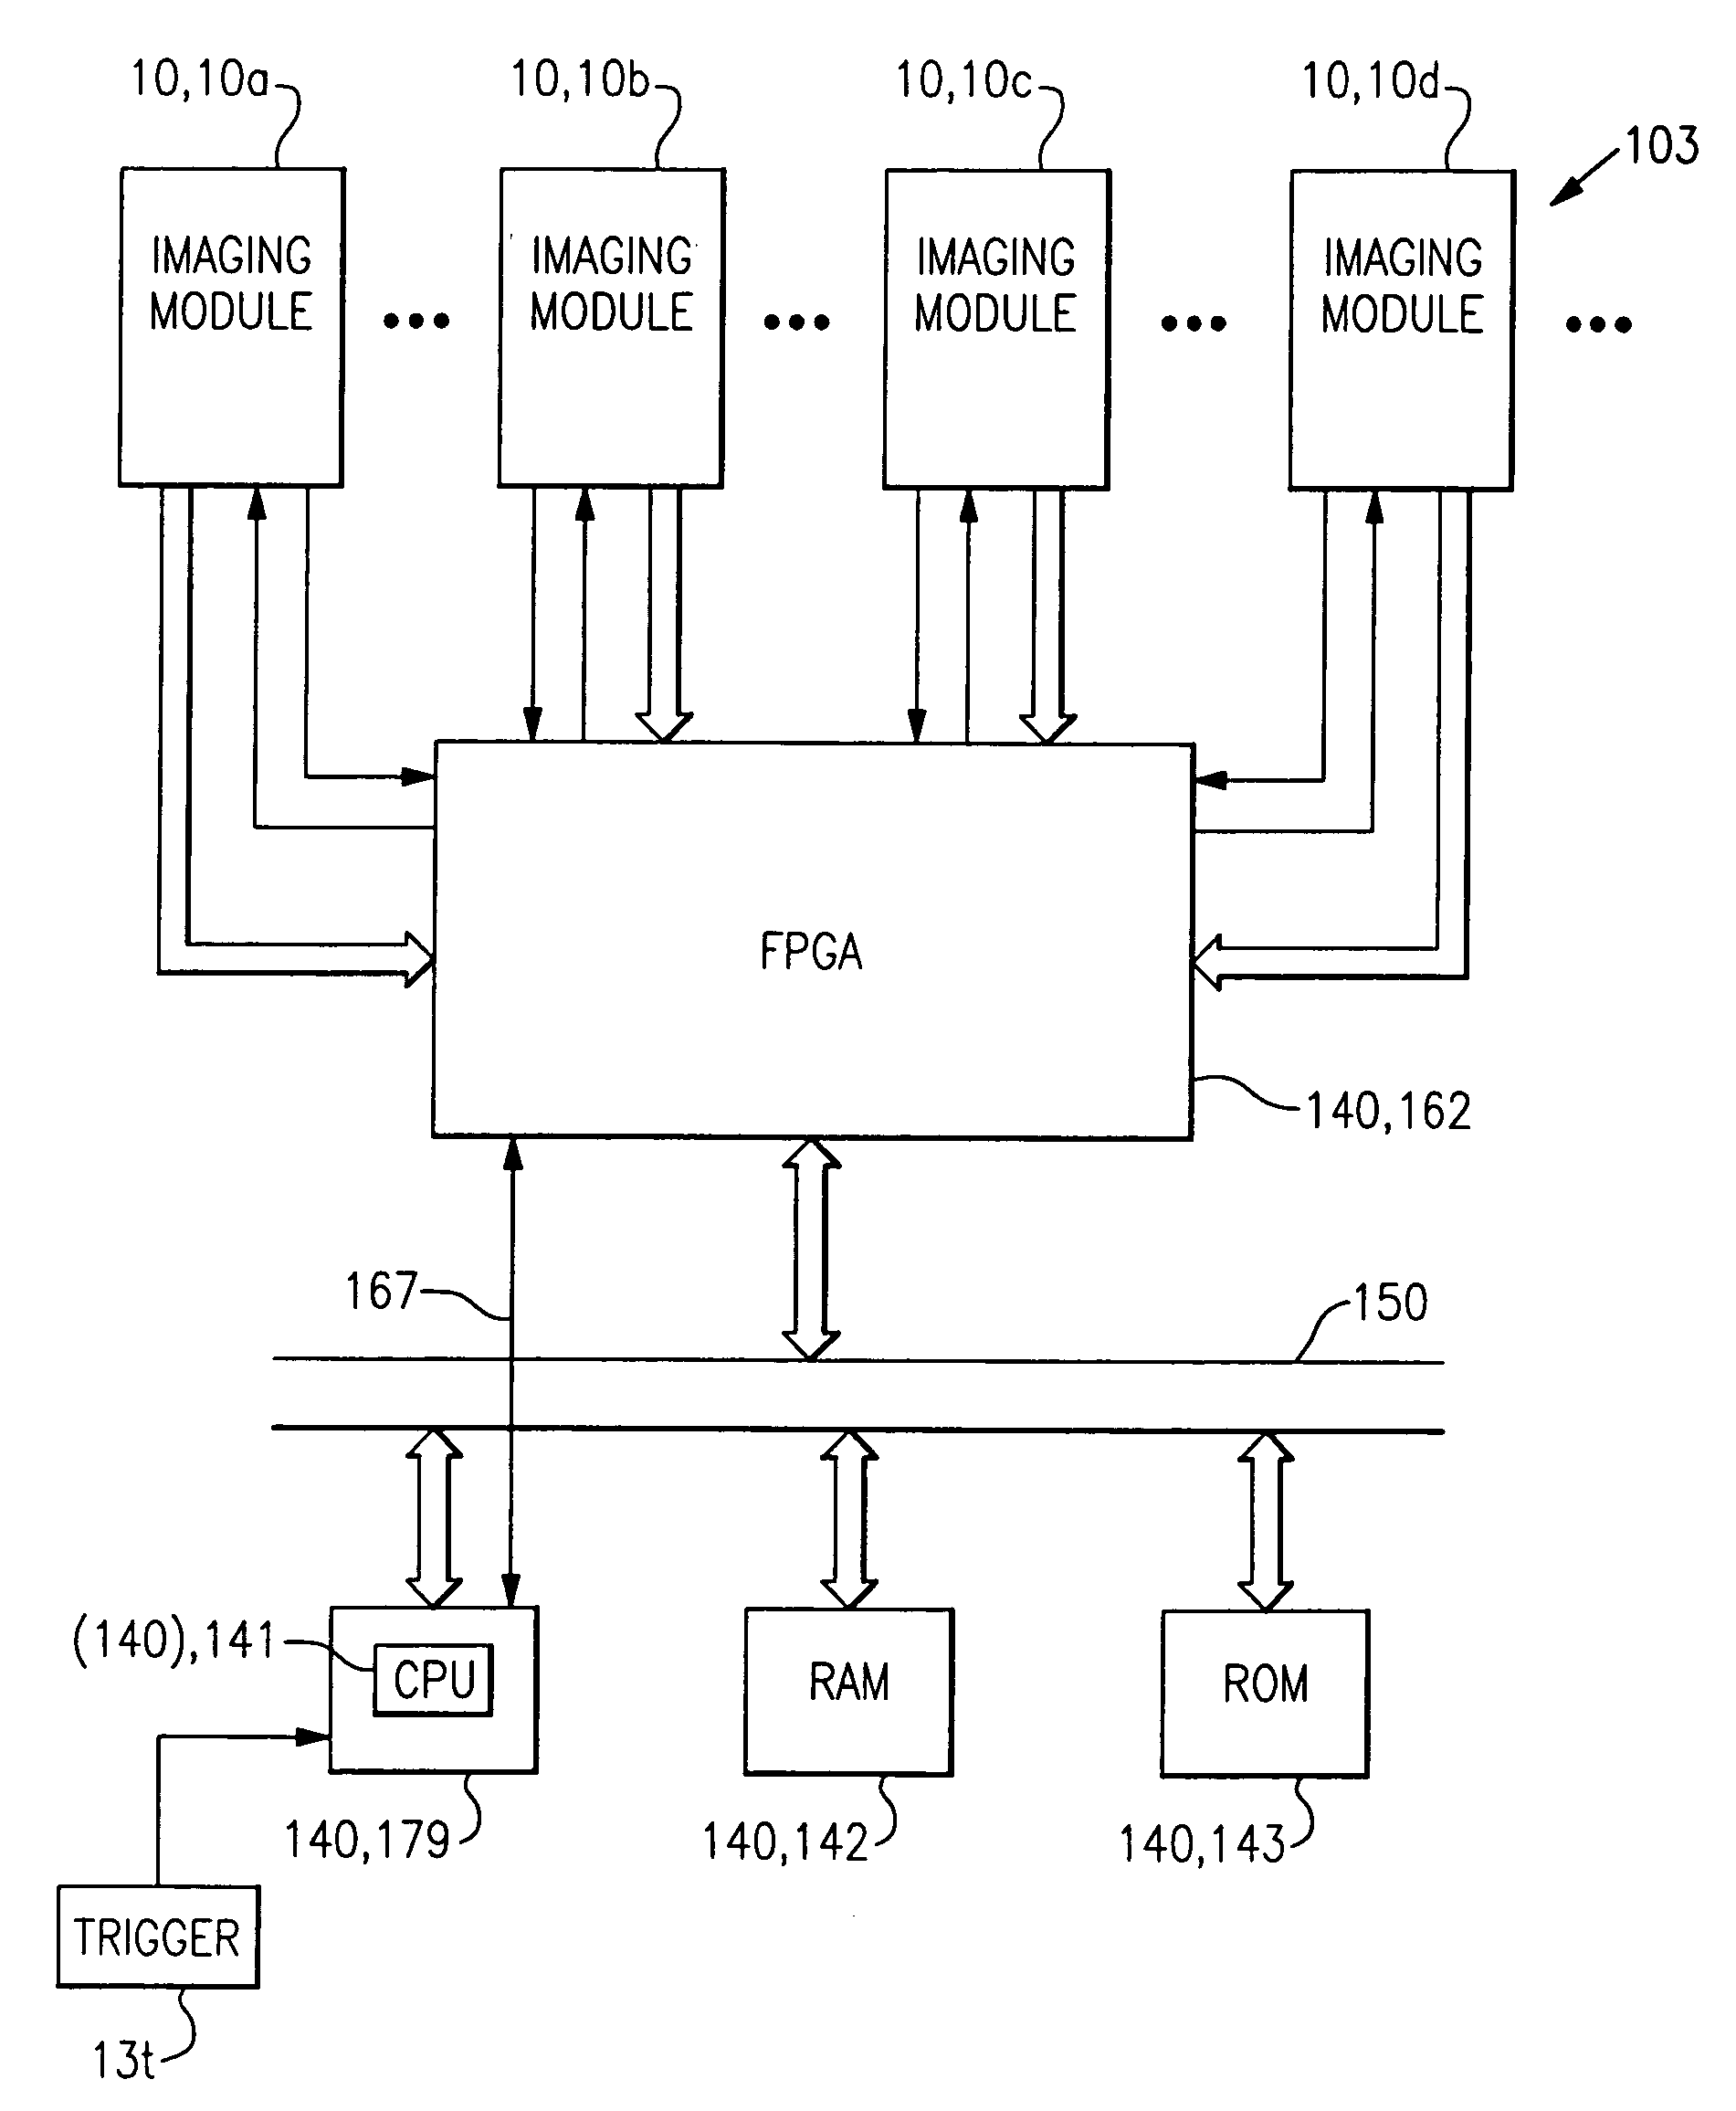 Decoder board for an optical reader utilizing a plurality of imaging formats